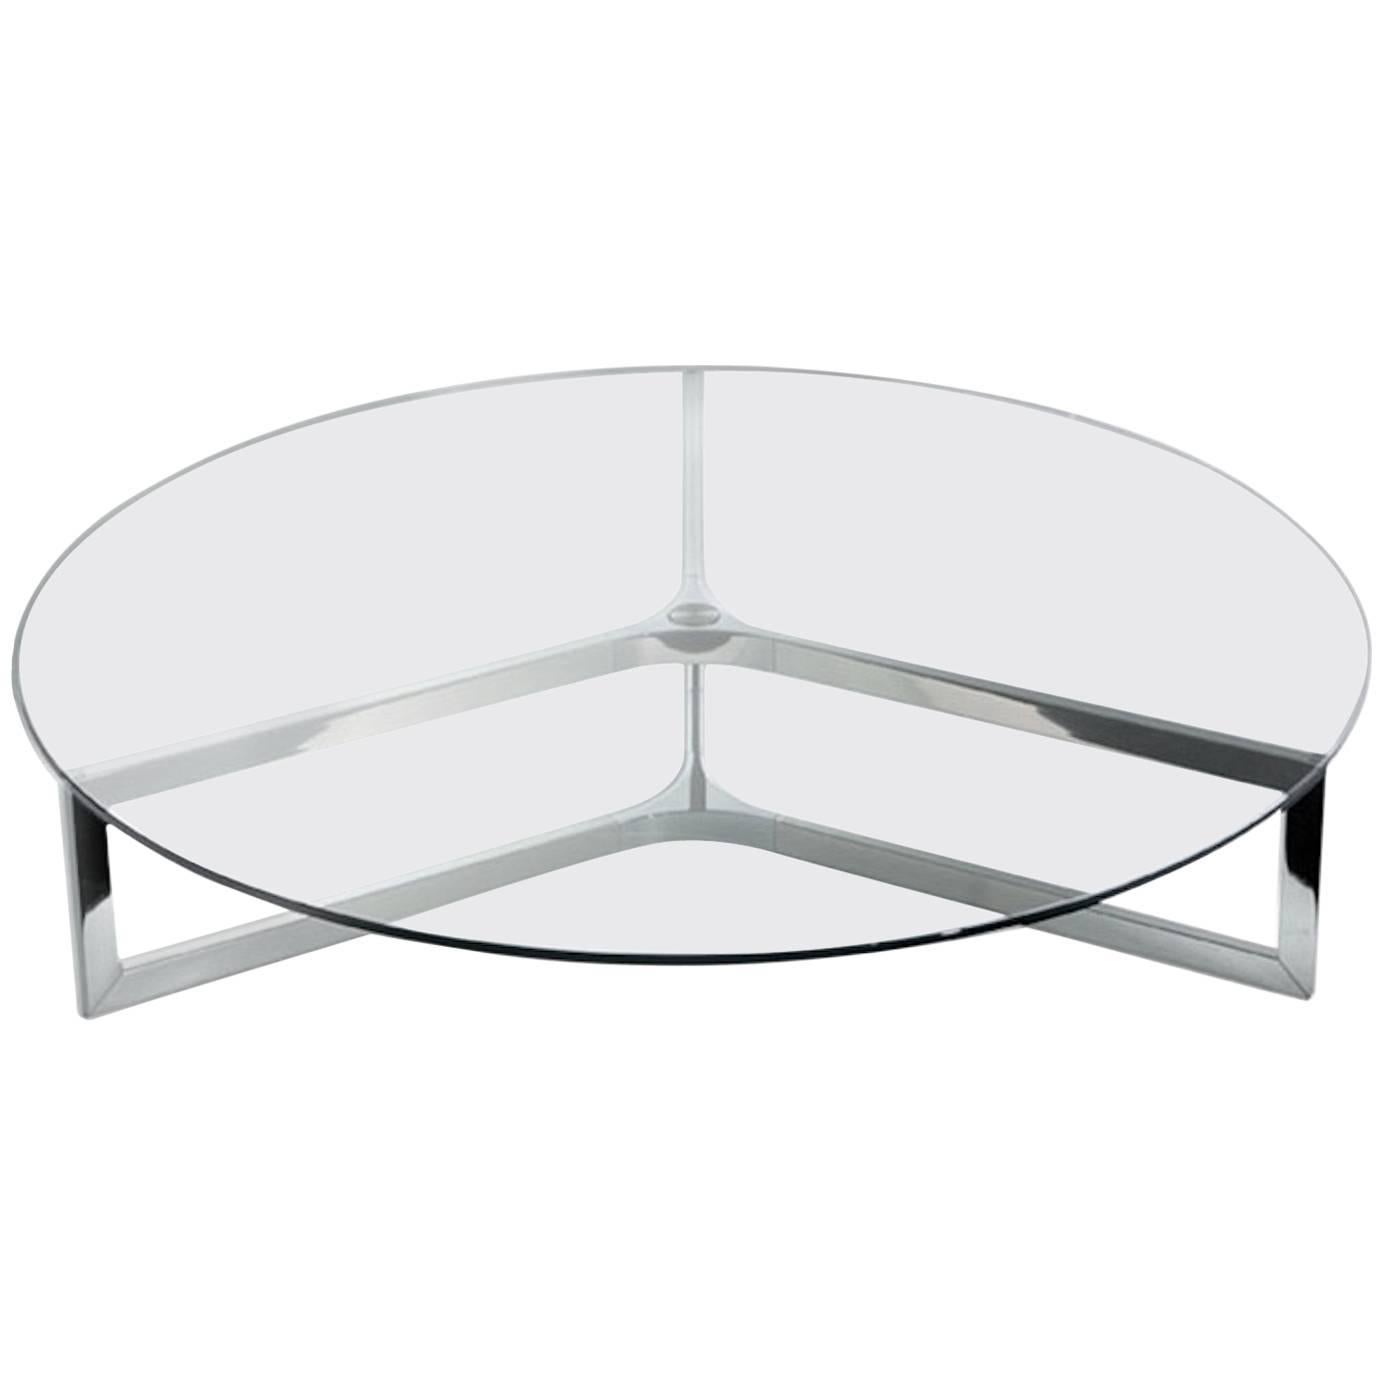 Raj One Coffee Table in Glass and Chrome Stainless Steel or Burnished Metal For Sale